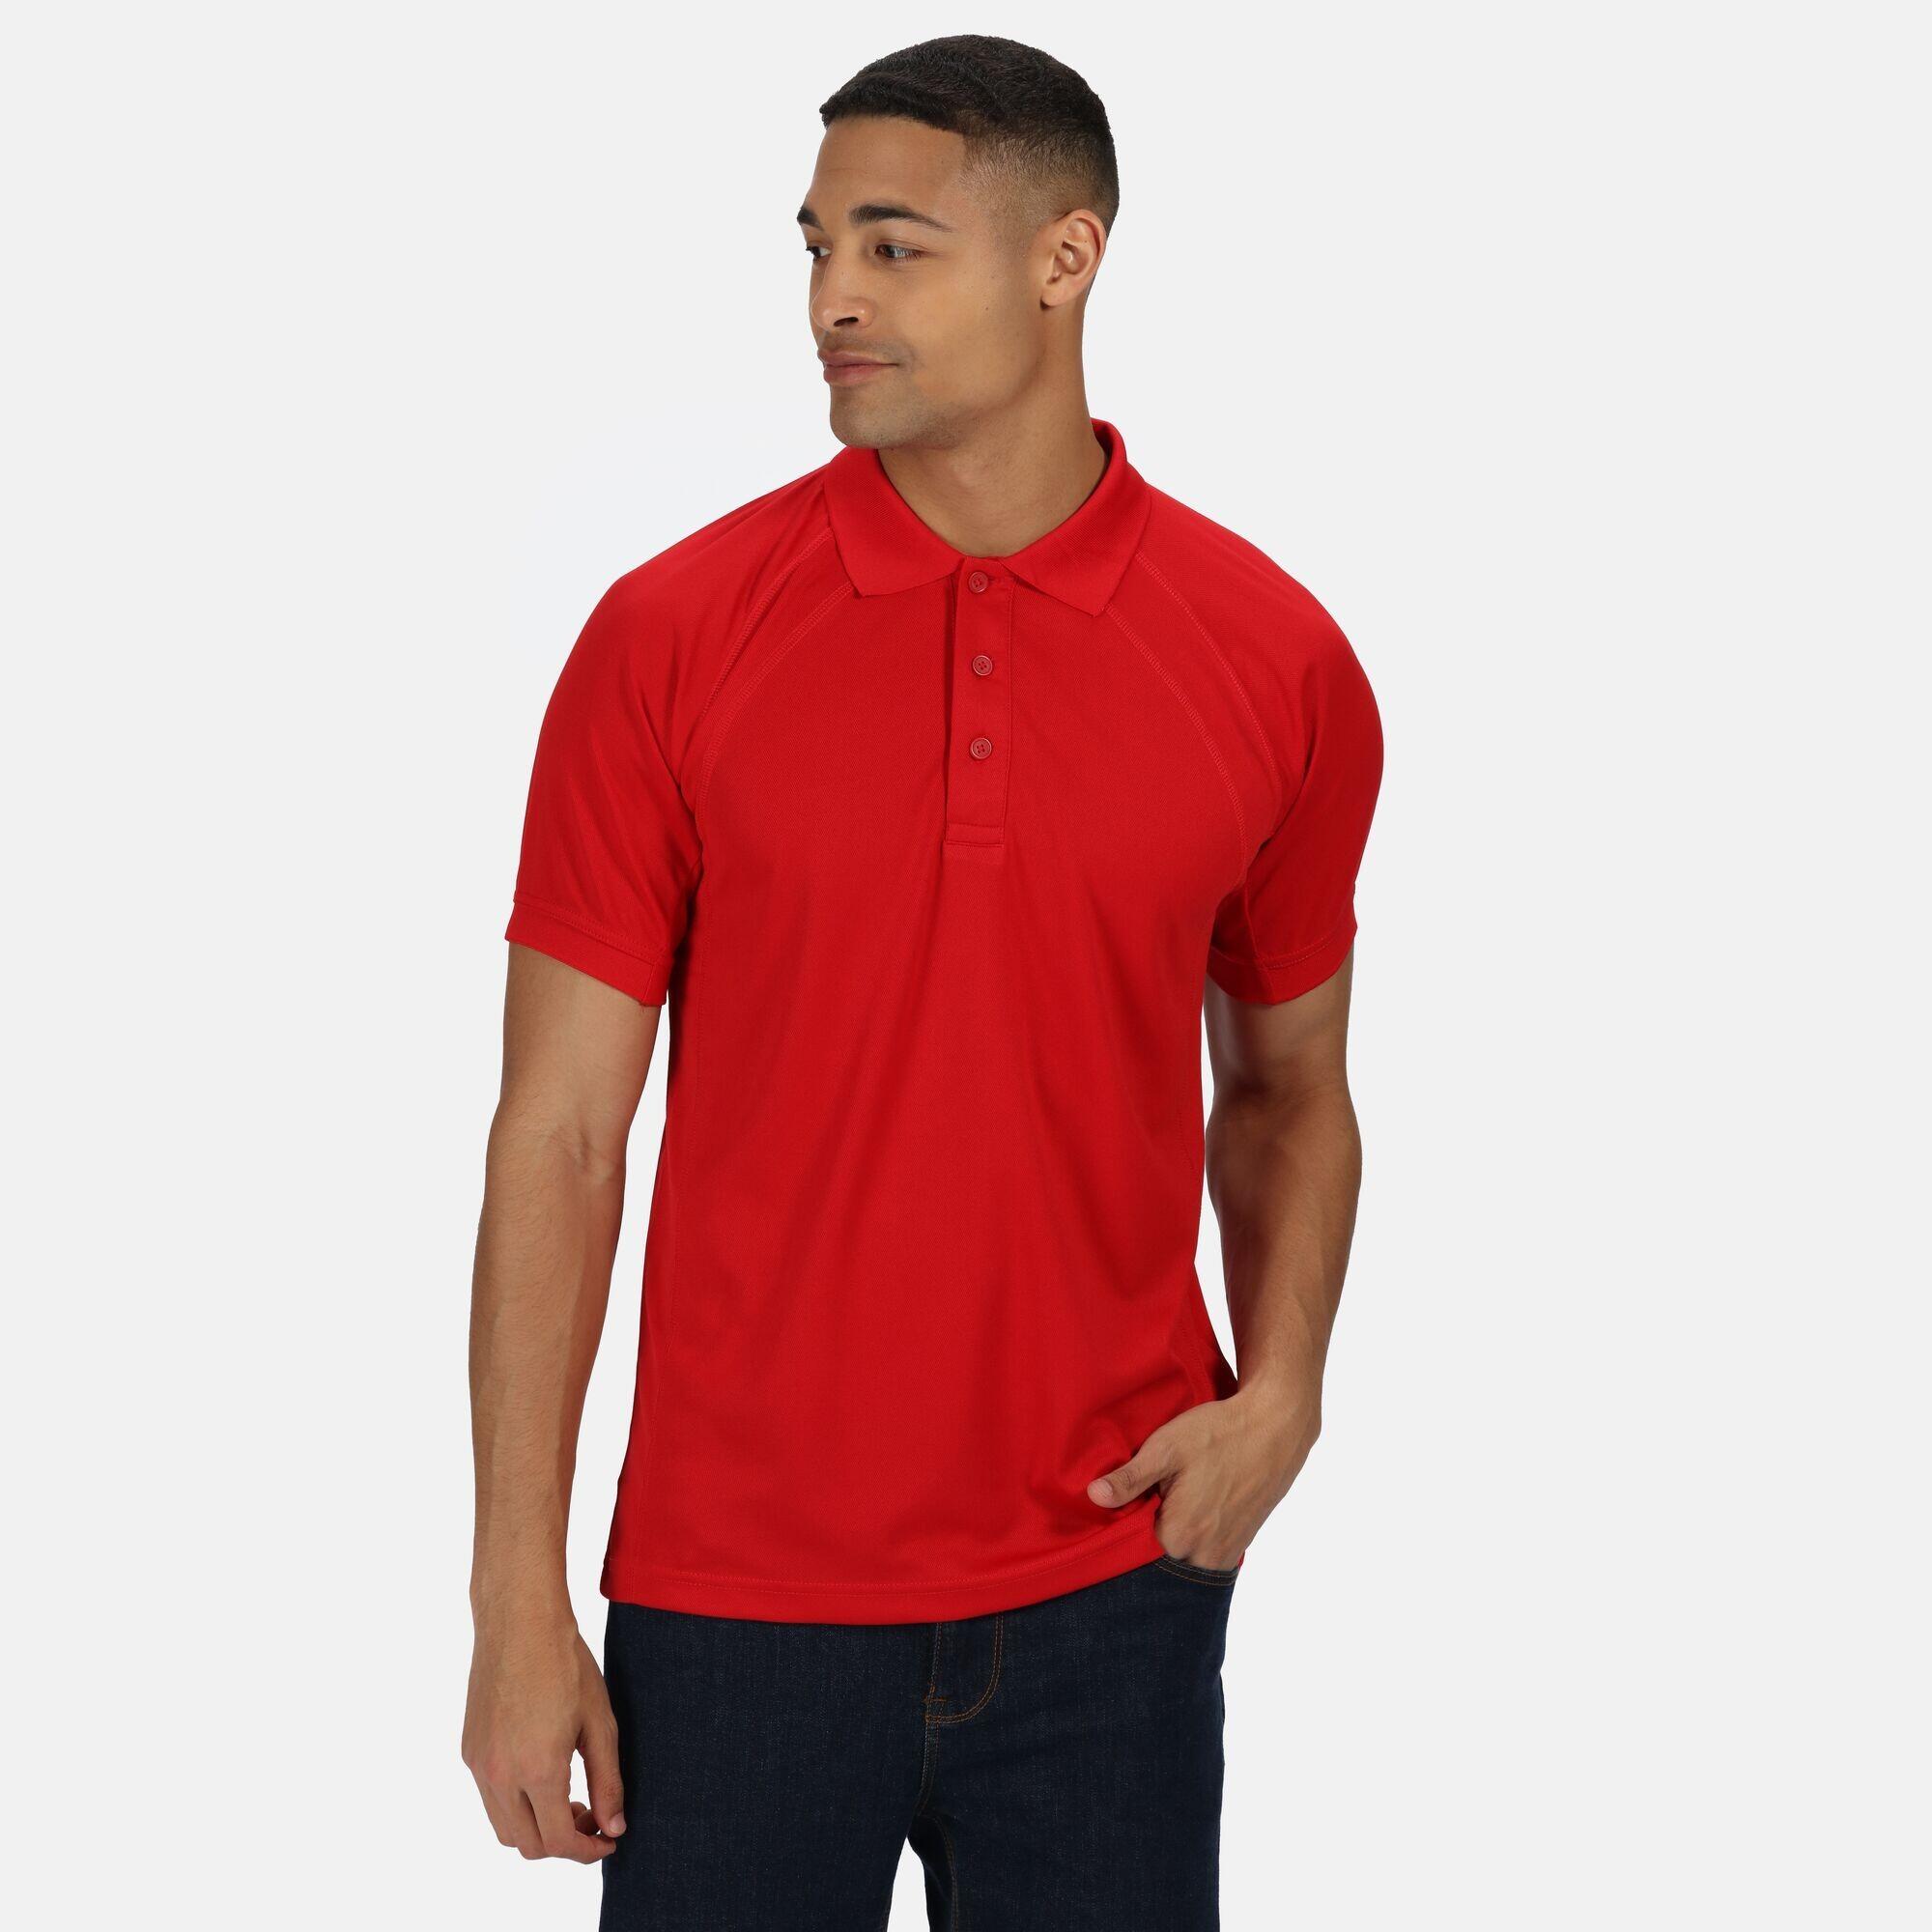 Hardwear Mens Coolweave Short Sleeve Polo Shirt (Classic Red) 2/5